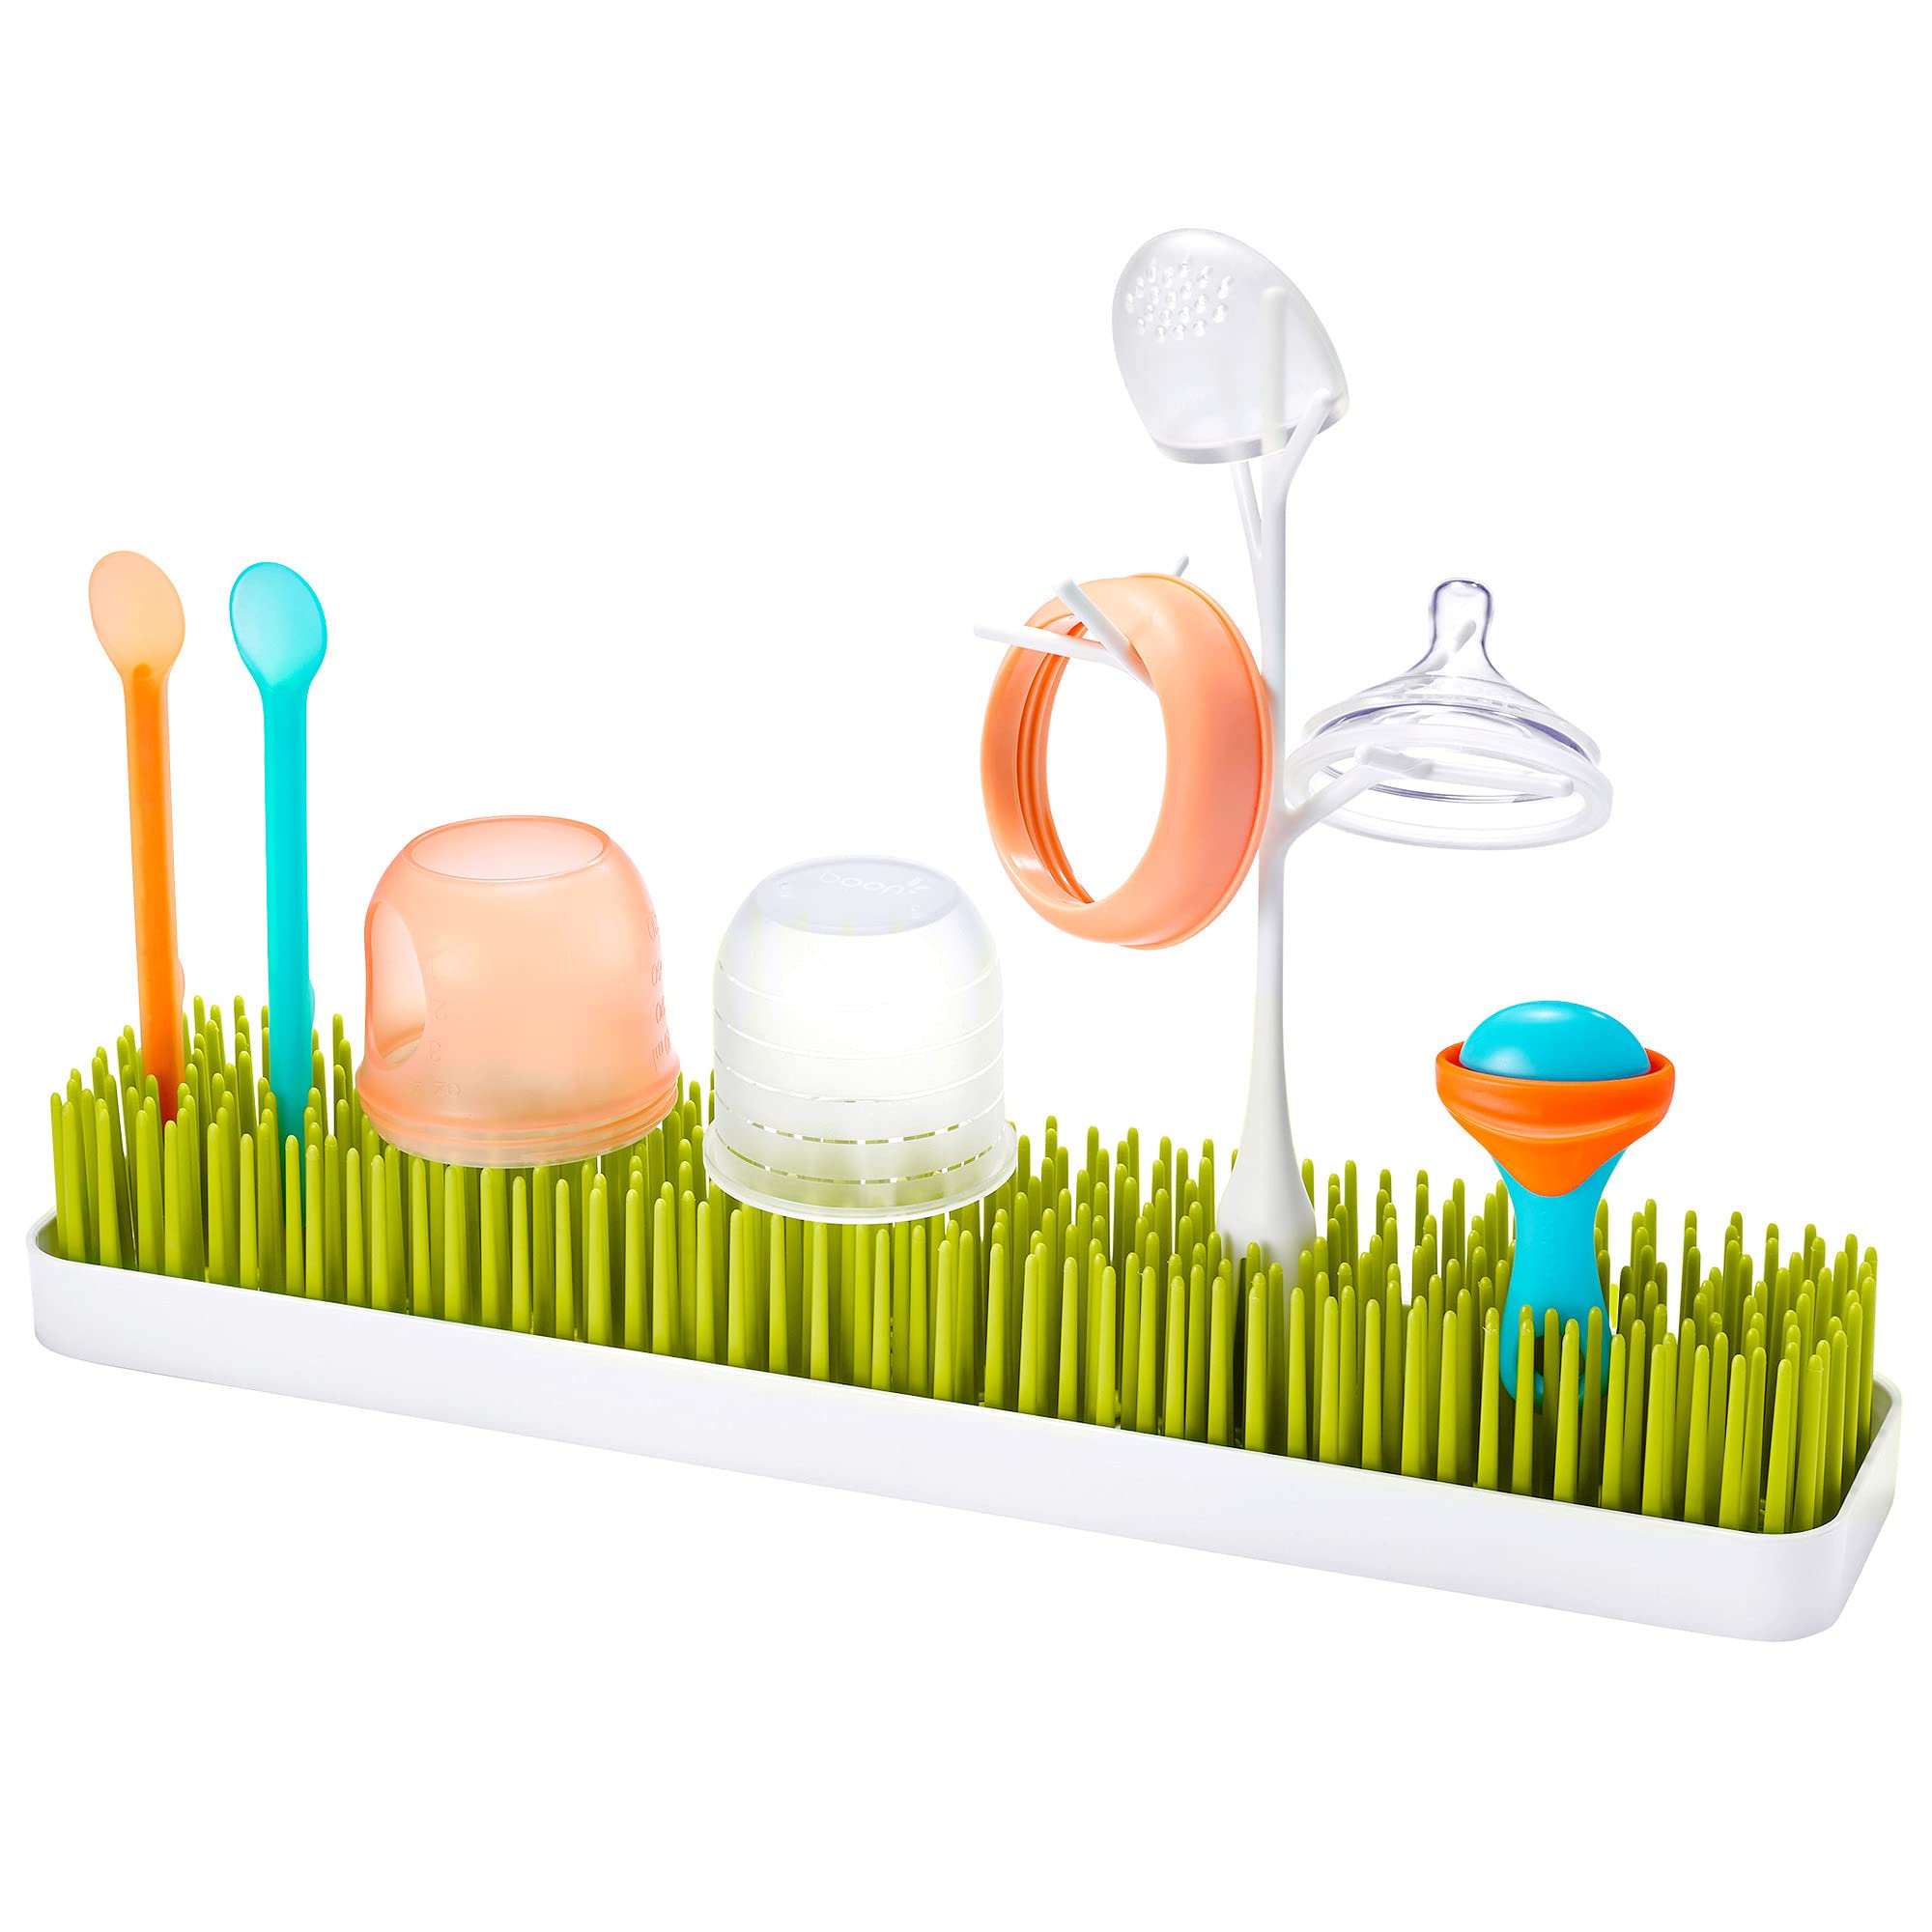 Boon Drying Rack Accessory